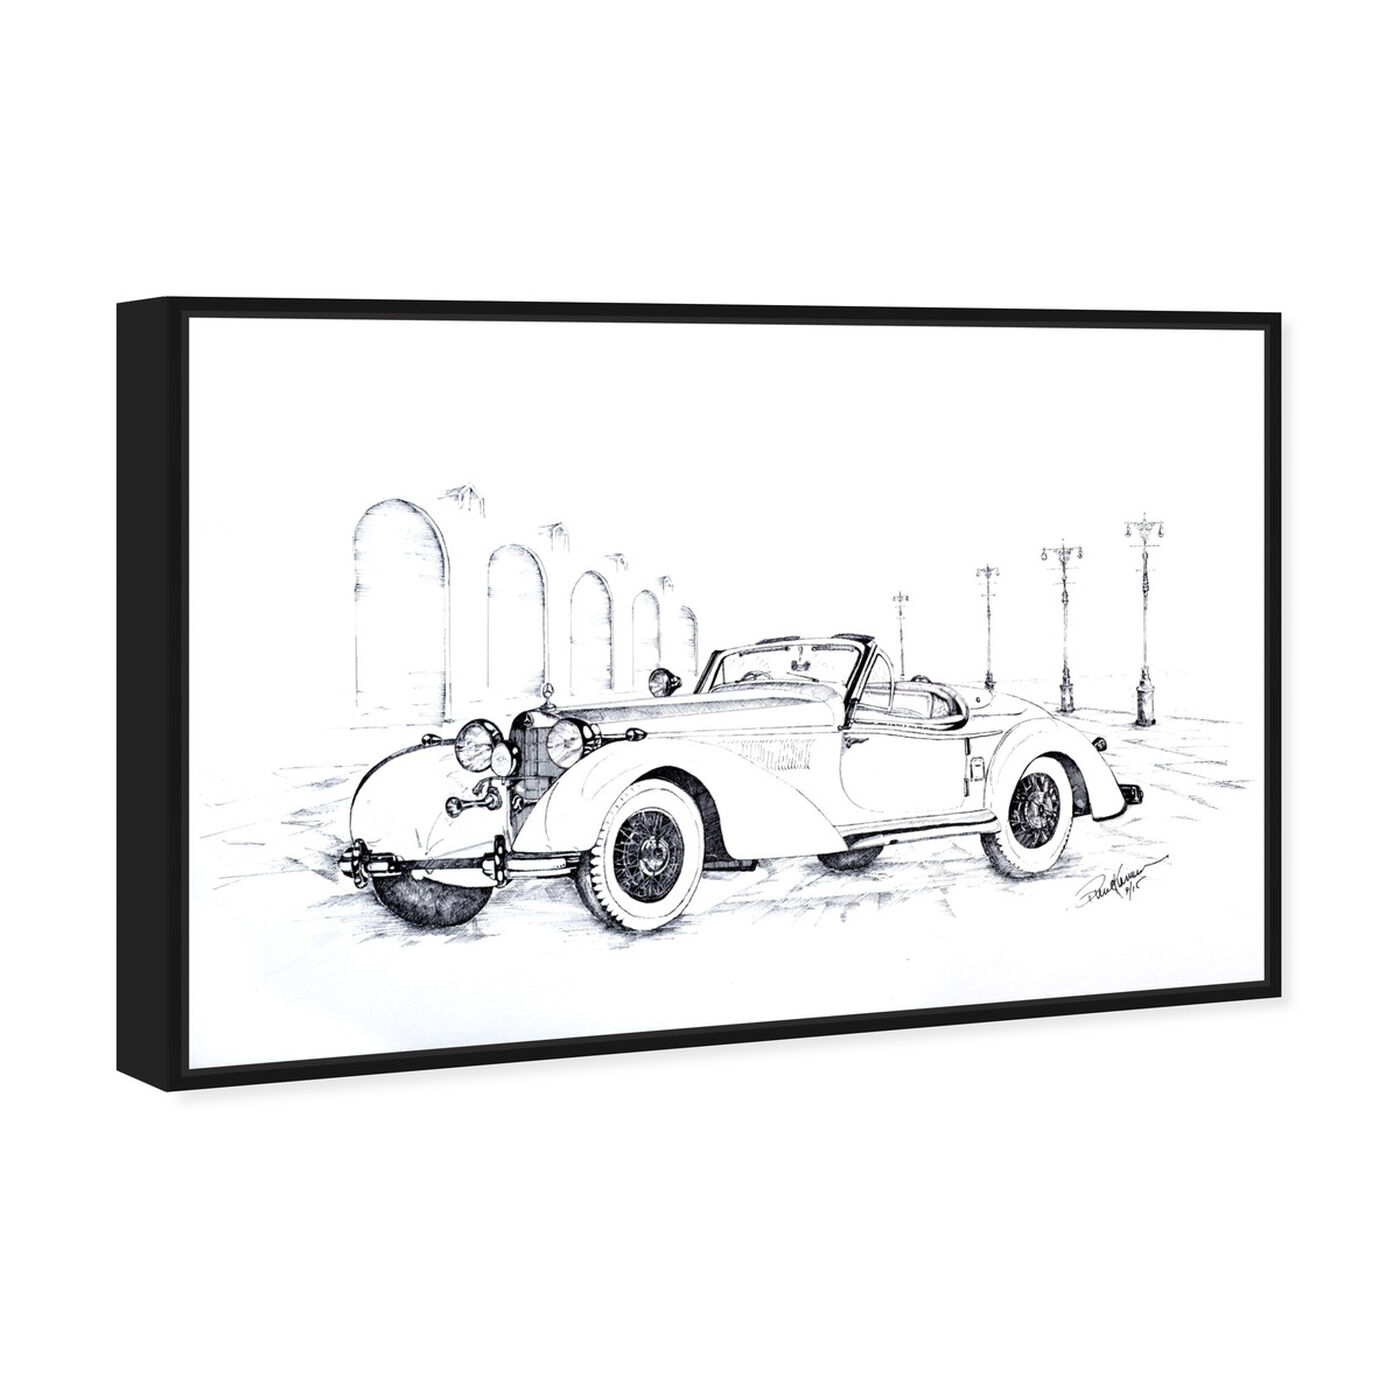 Angled view of Paul Kaminer - 1936 Mercedes Roadster featuring transportation and automobiles art.